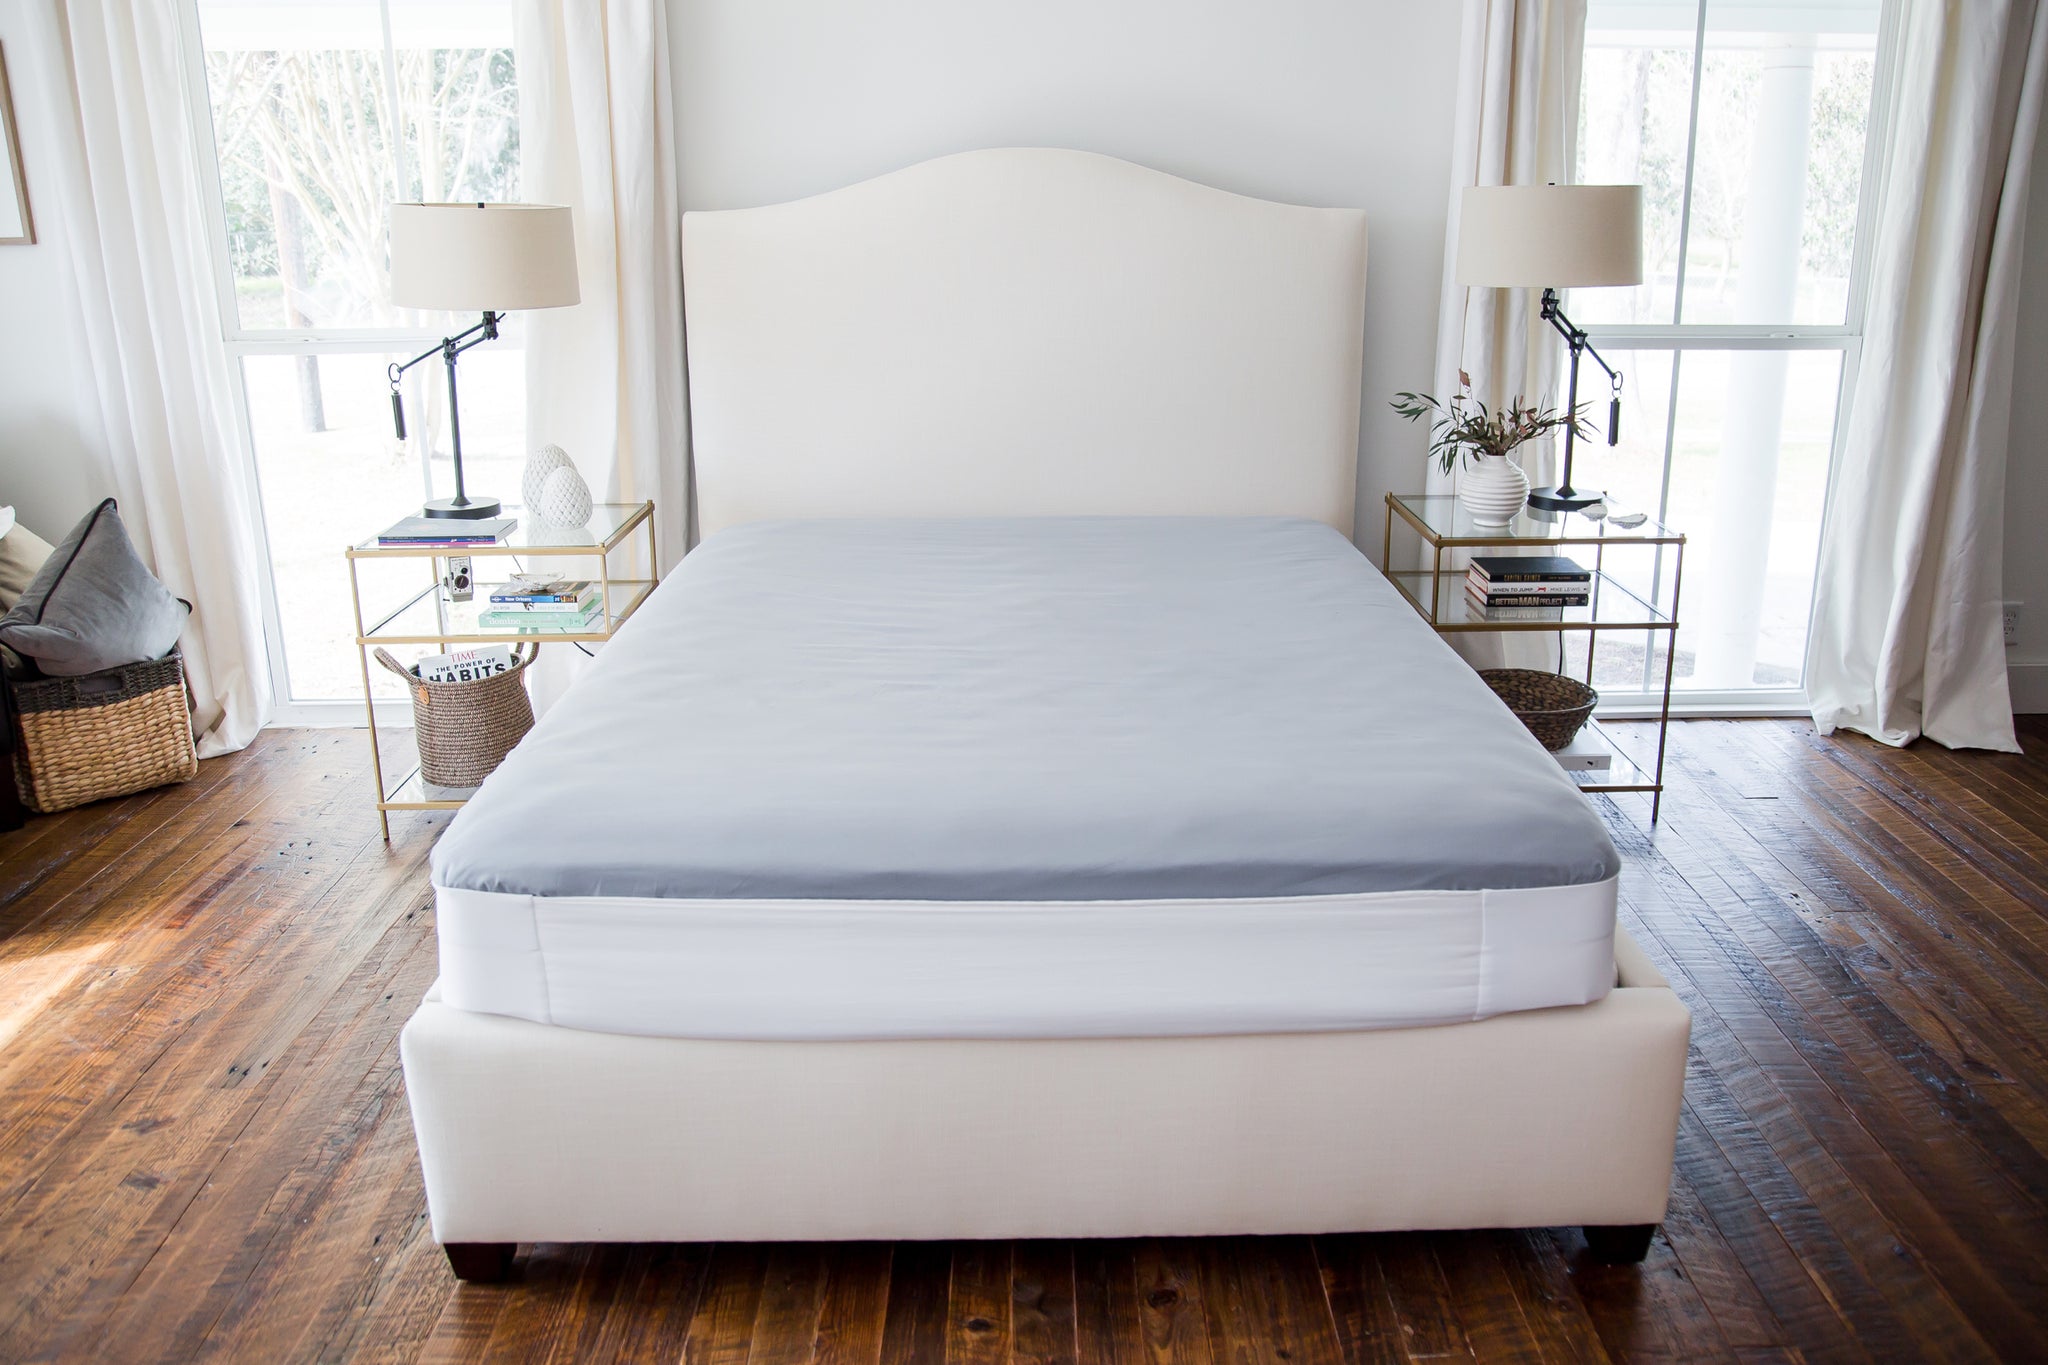 Better Bedder Bed Headband Transforms Any Flat Sheet into A Fitted Sheet -  KING